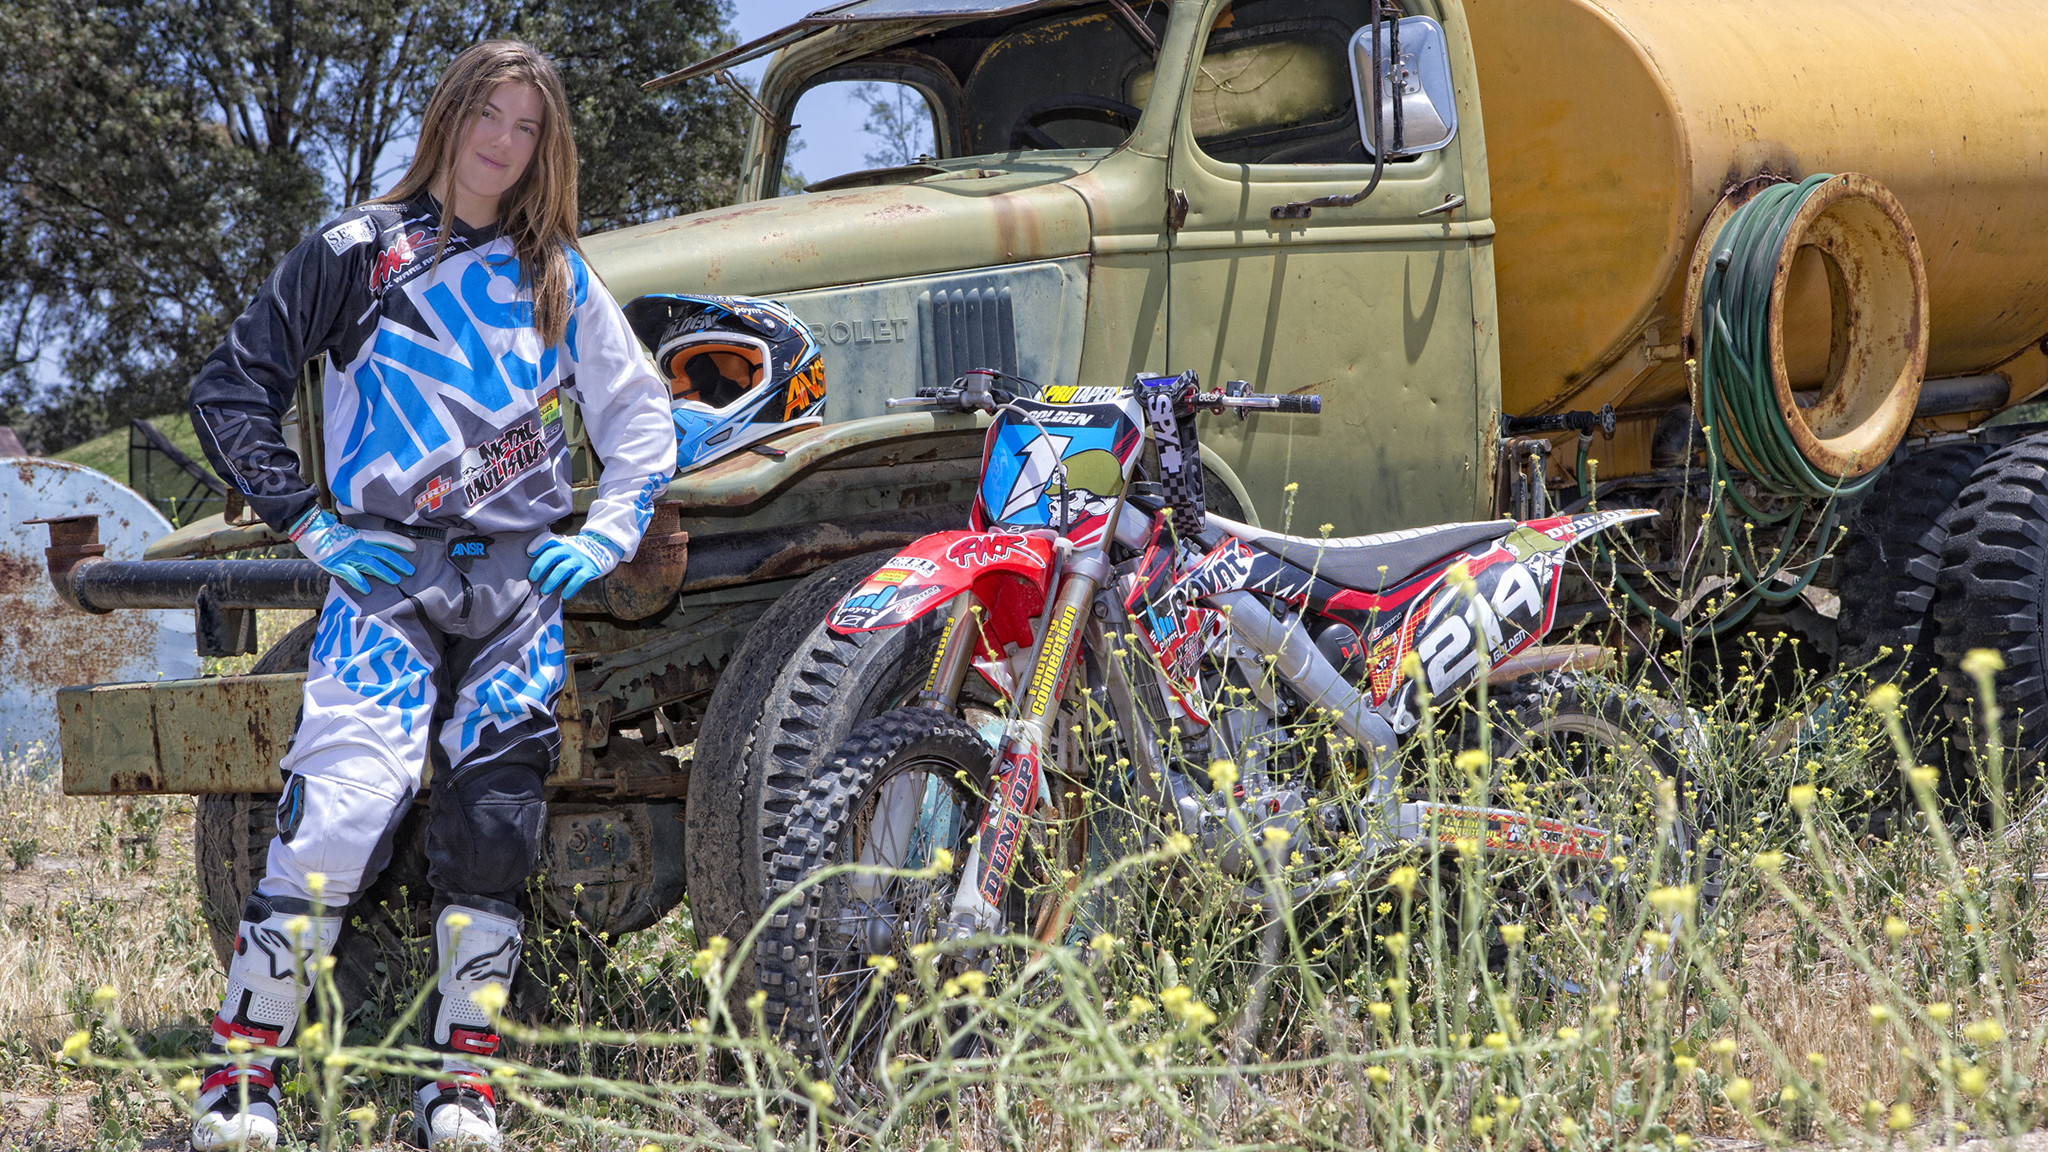 2048x1152 Vicki Golden joined the Metal Mulisha team this week, becoming the first  female team rider